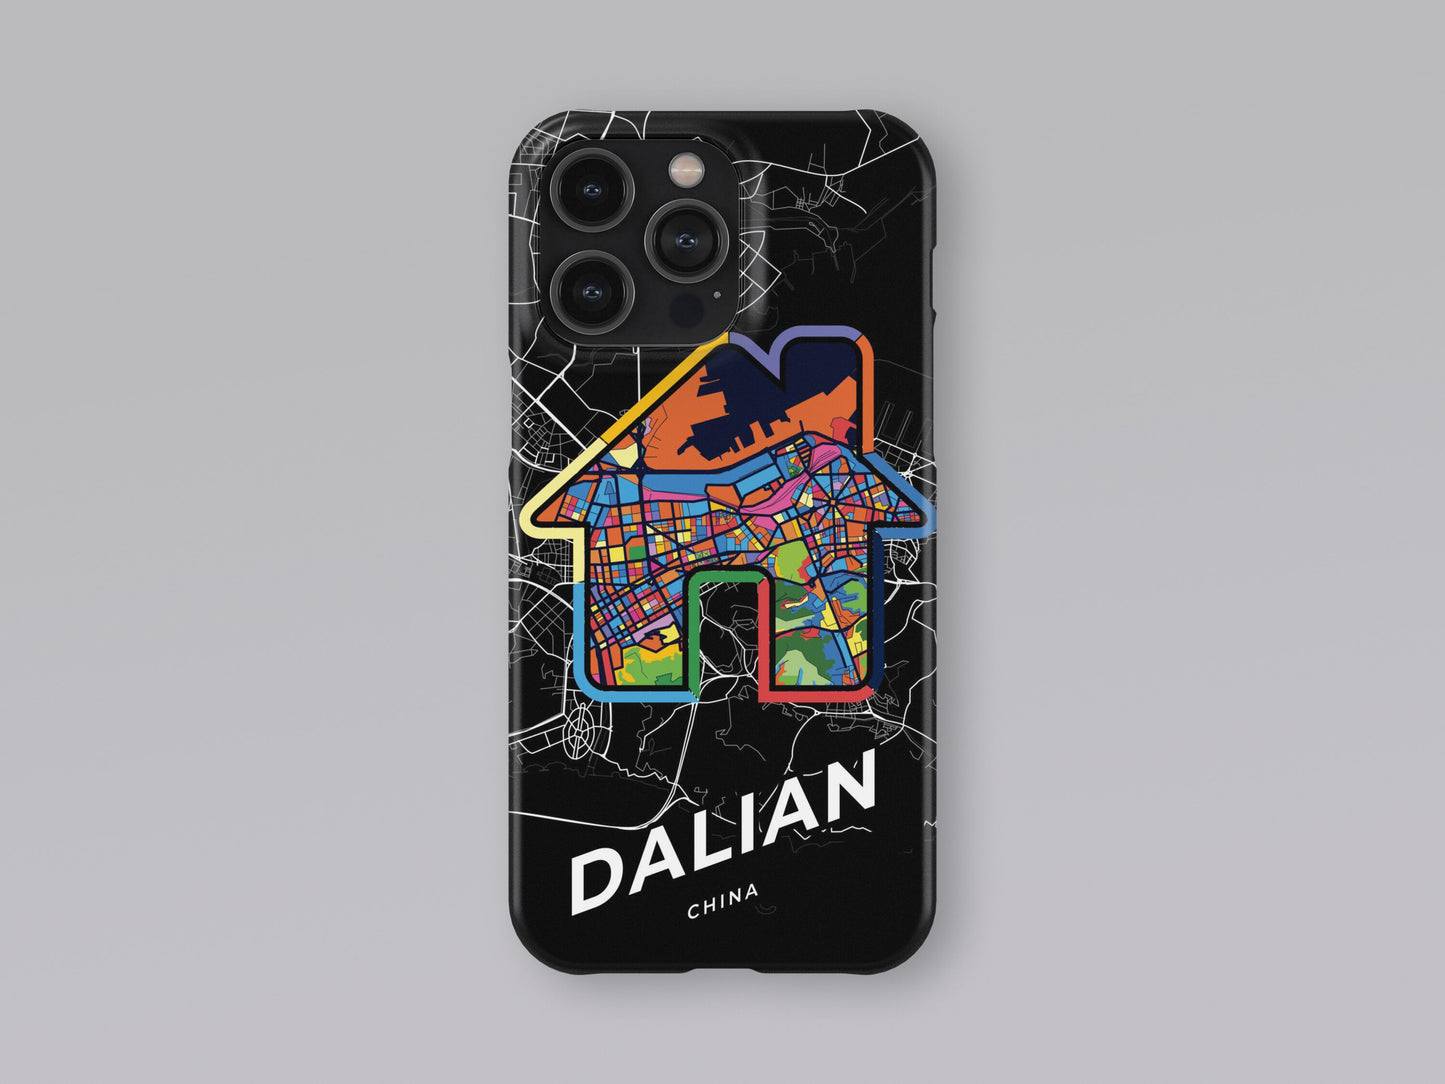 Dalian China slim phone case with colorful icon. Birthday, wedding or housewarming gift. Couple match cases. 3